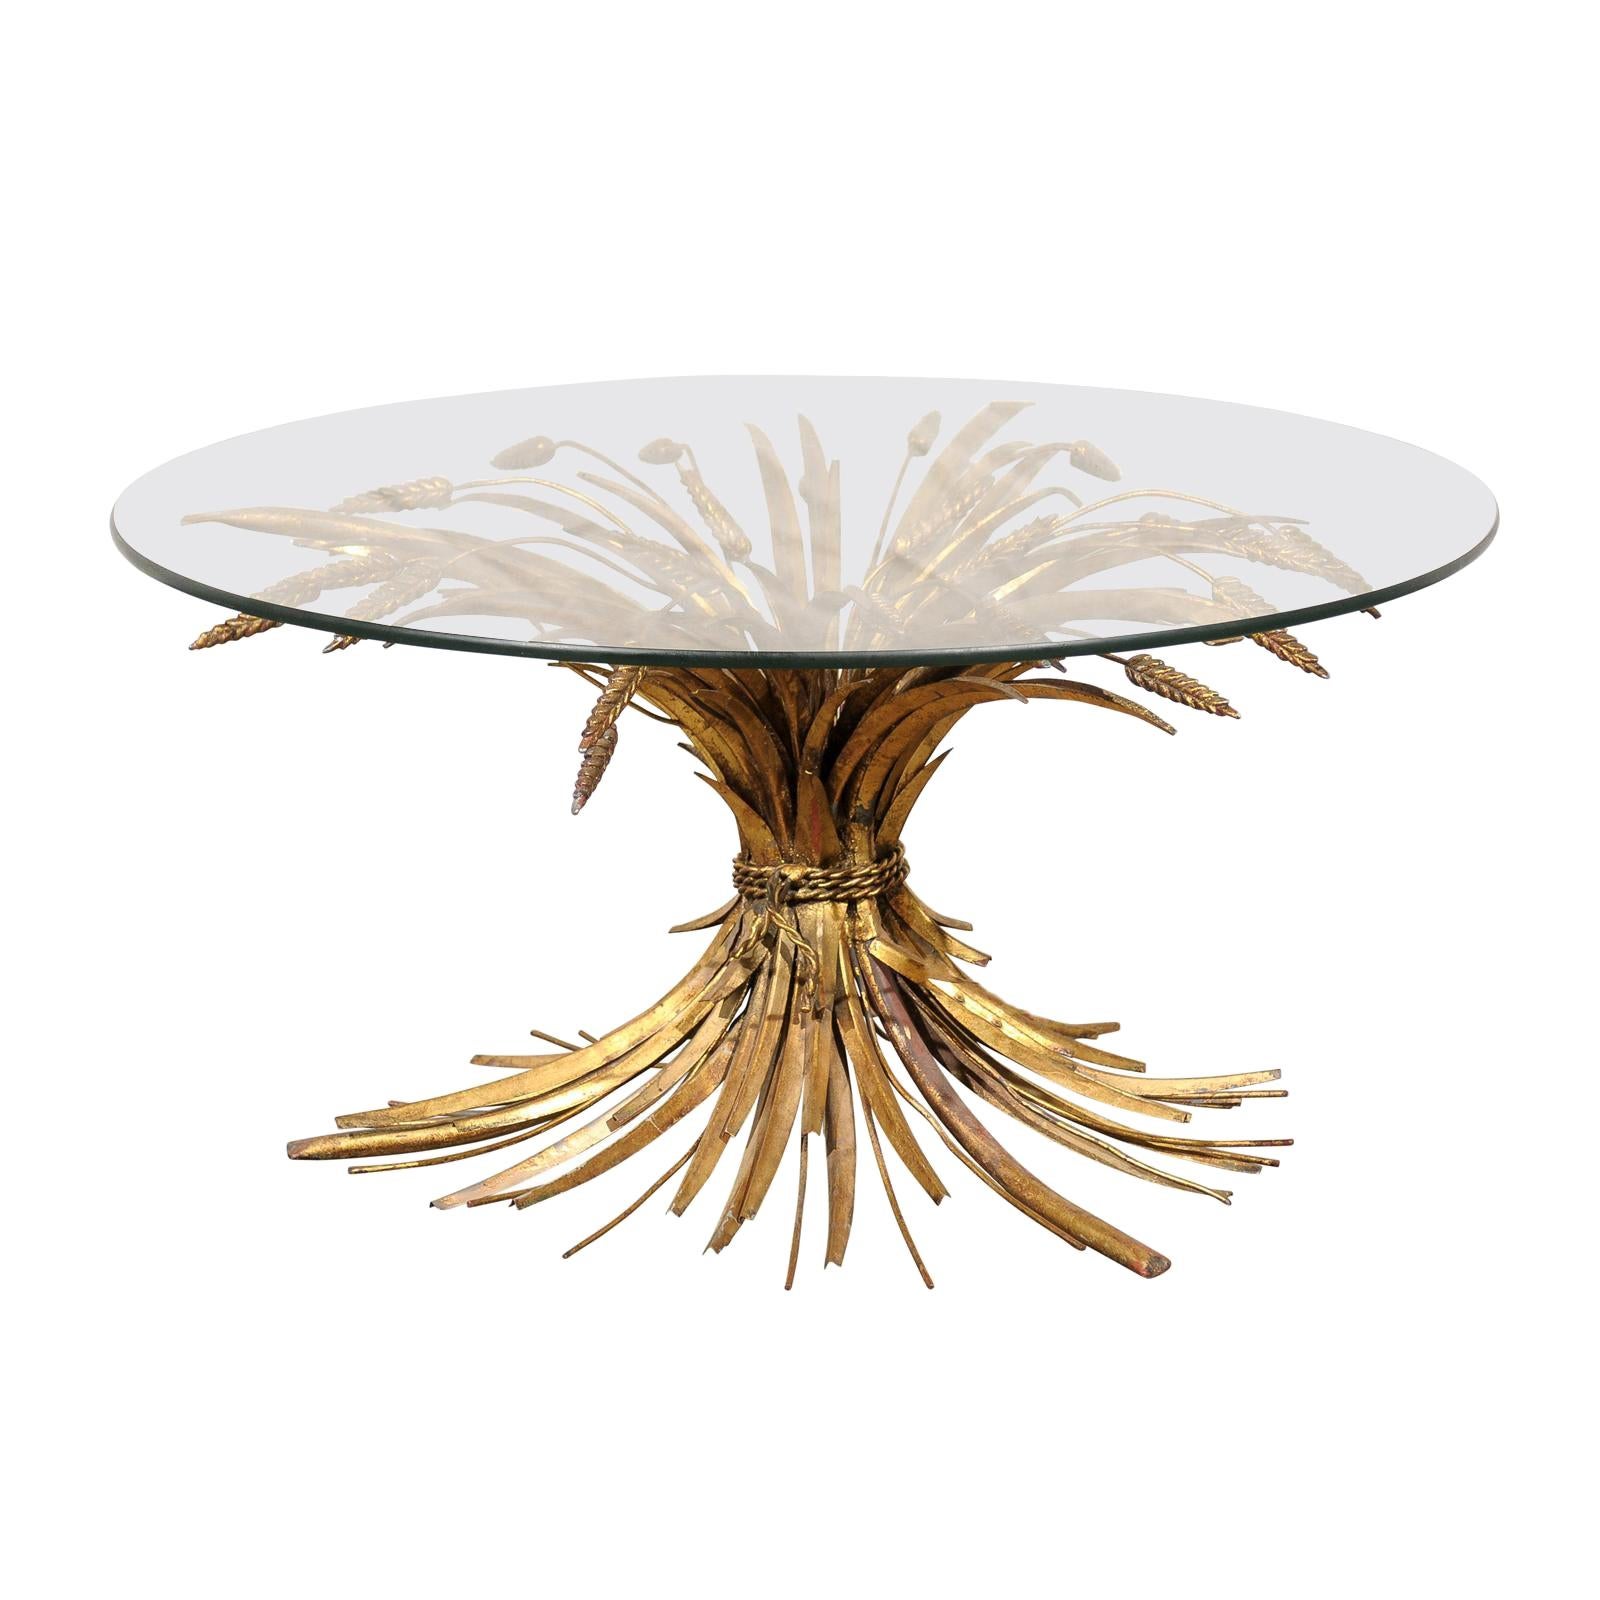 Mid-20th Century Gilt Metal Sheaf of Wheat Coffee Table with Round Glass Top